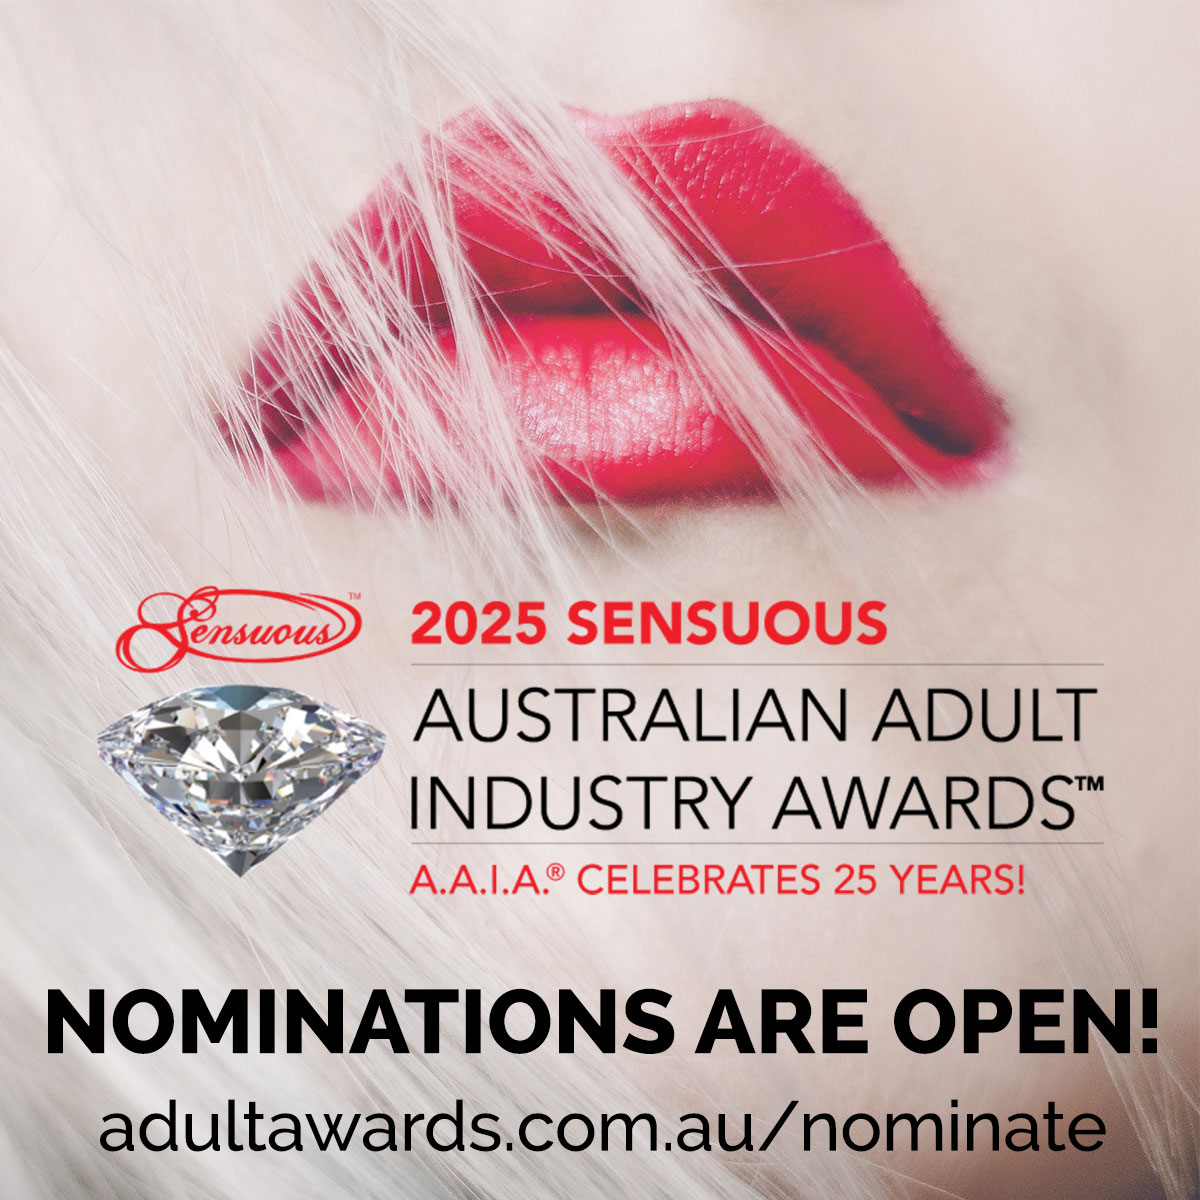 2025 Sensuous Australian Adult Industry Awards - Nominations are open